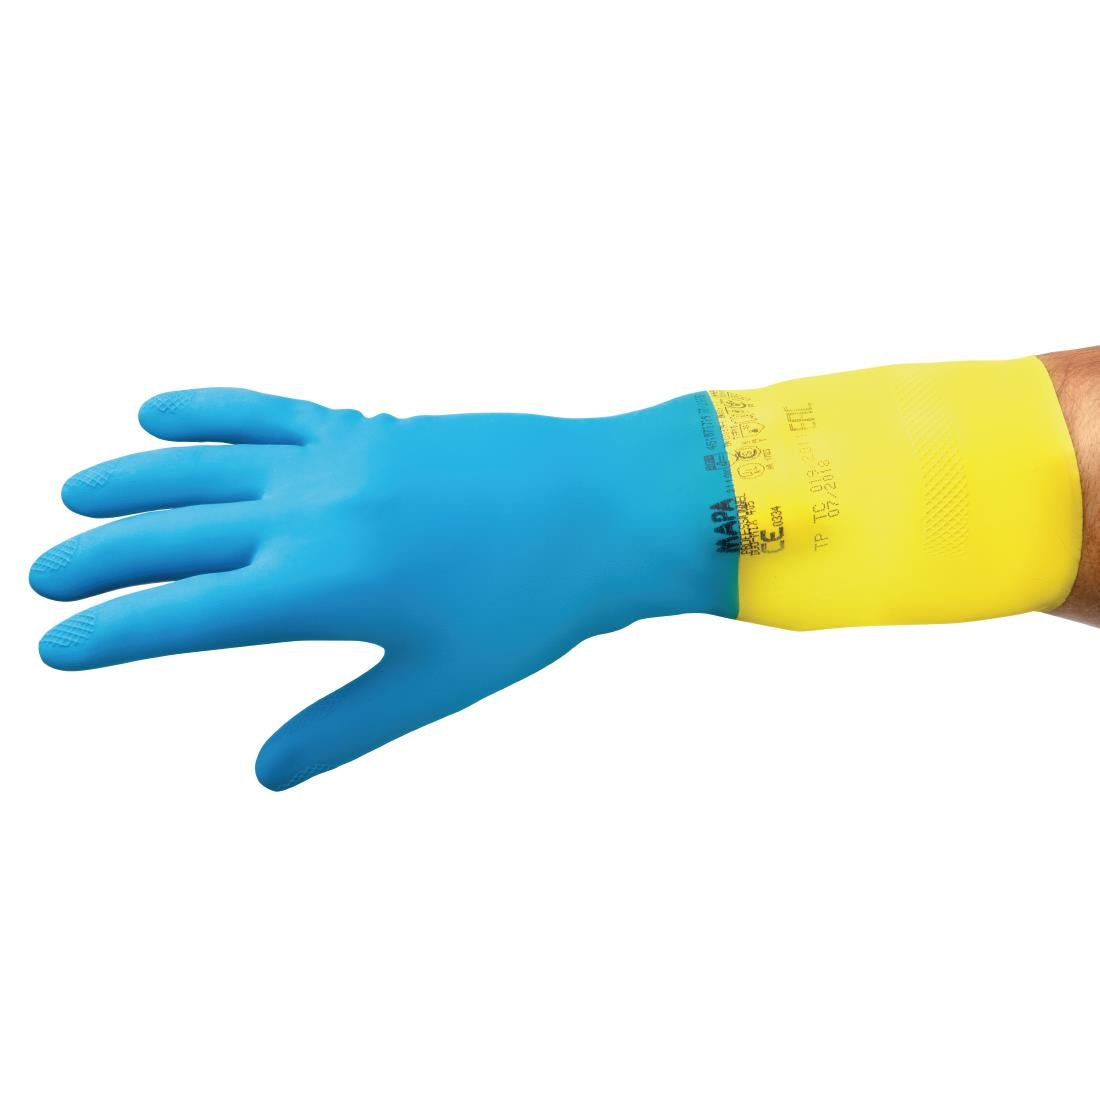 MAPA Alto 405 Liquid-Proof Heavy-Duty Janitorial Gloves Blue and Yellow JD Catering Equipment Solutions Ltd